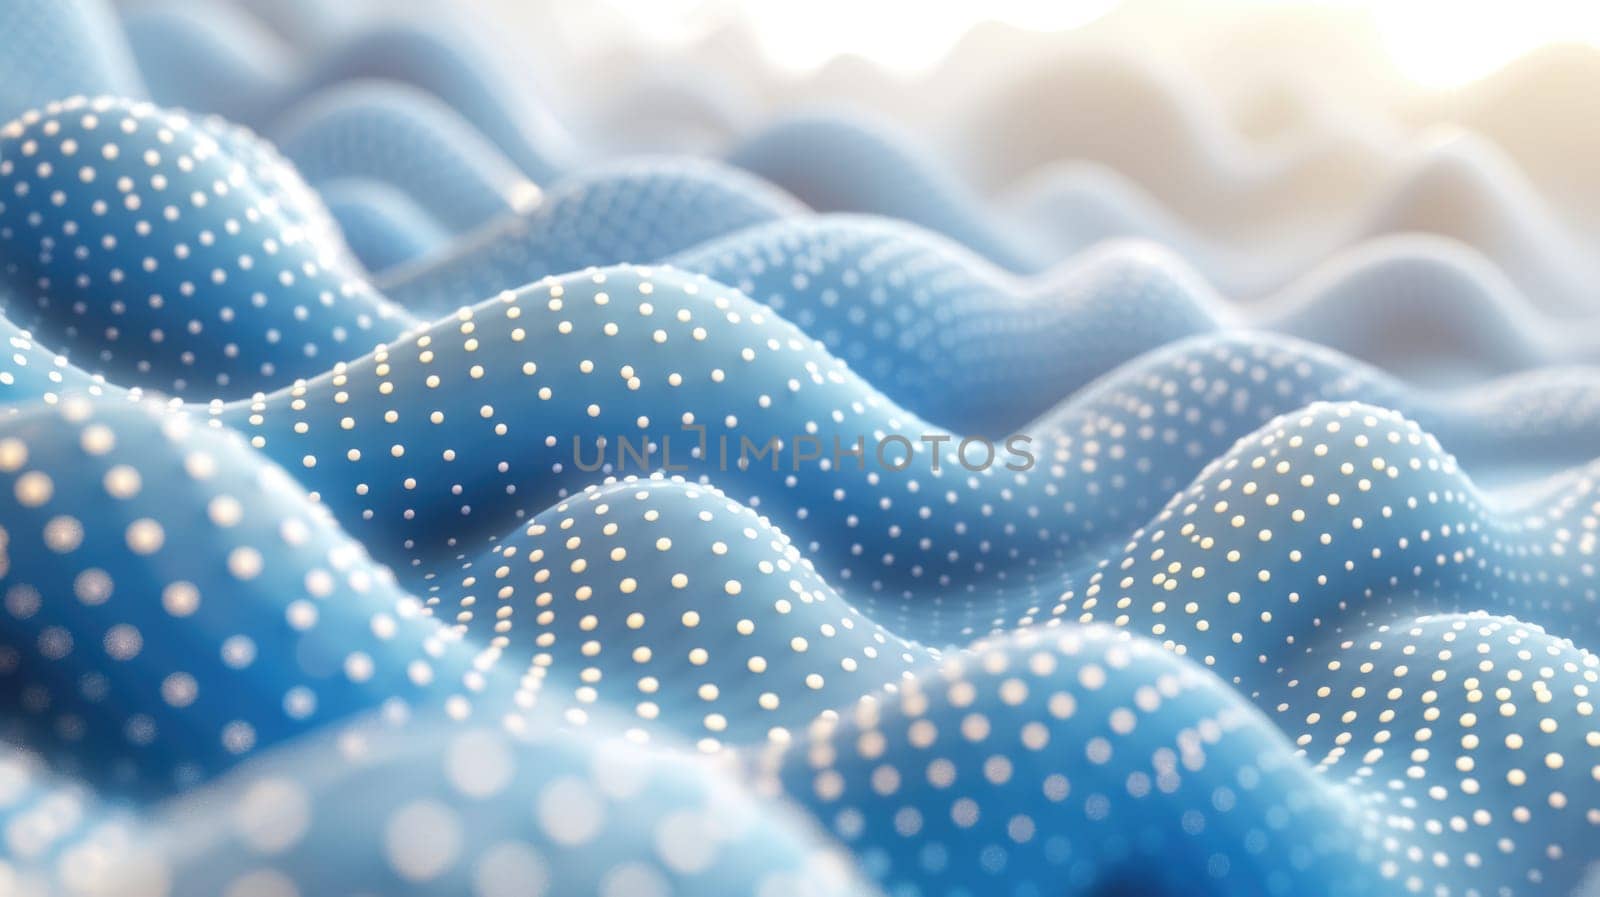 A detailed view of several blue and white balls in close proximity, creating an abstract pattern.